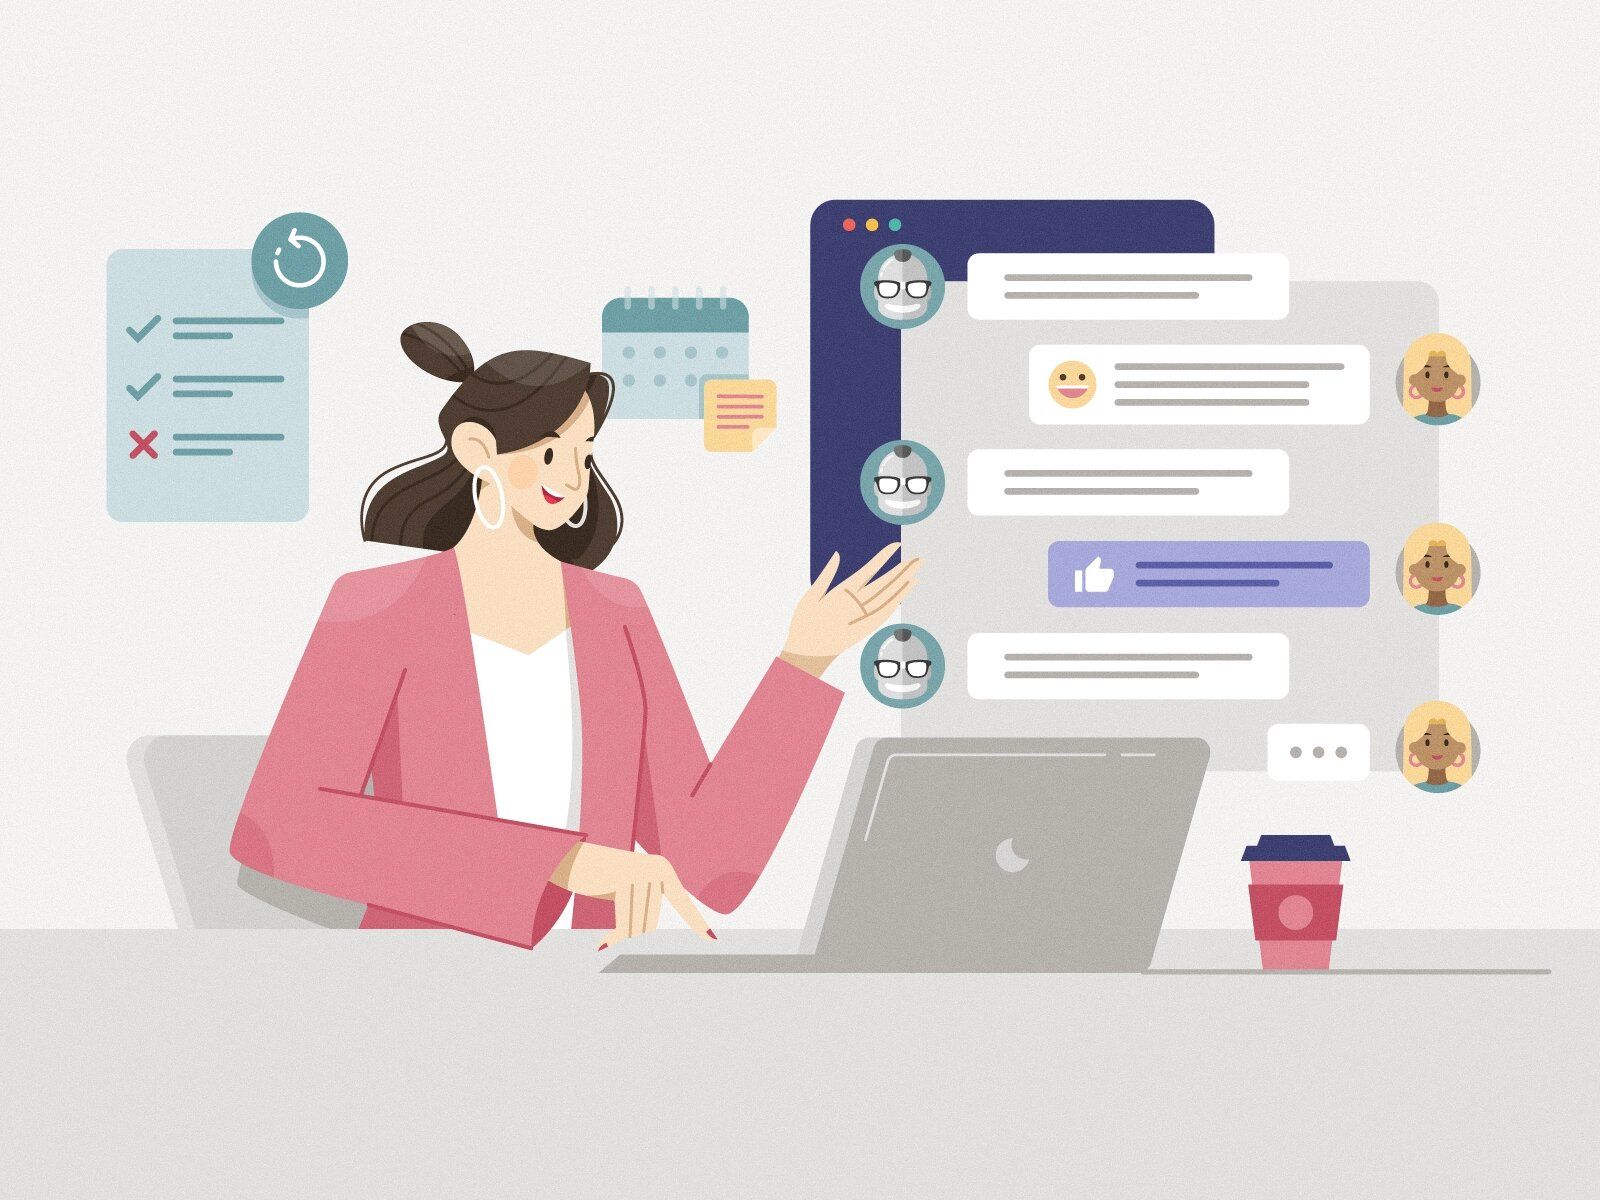 Sprint retrospective for remote employees should be an event of sharing ups and downs, but not making anyone guilty (*image by [Unini](https://dribbble.com/Unini){ rel="nofollow" target="_blank" .default-md}*)